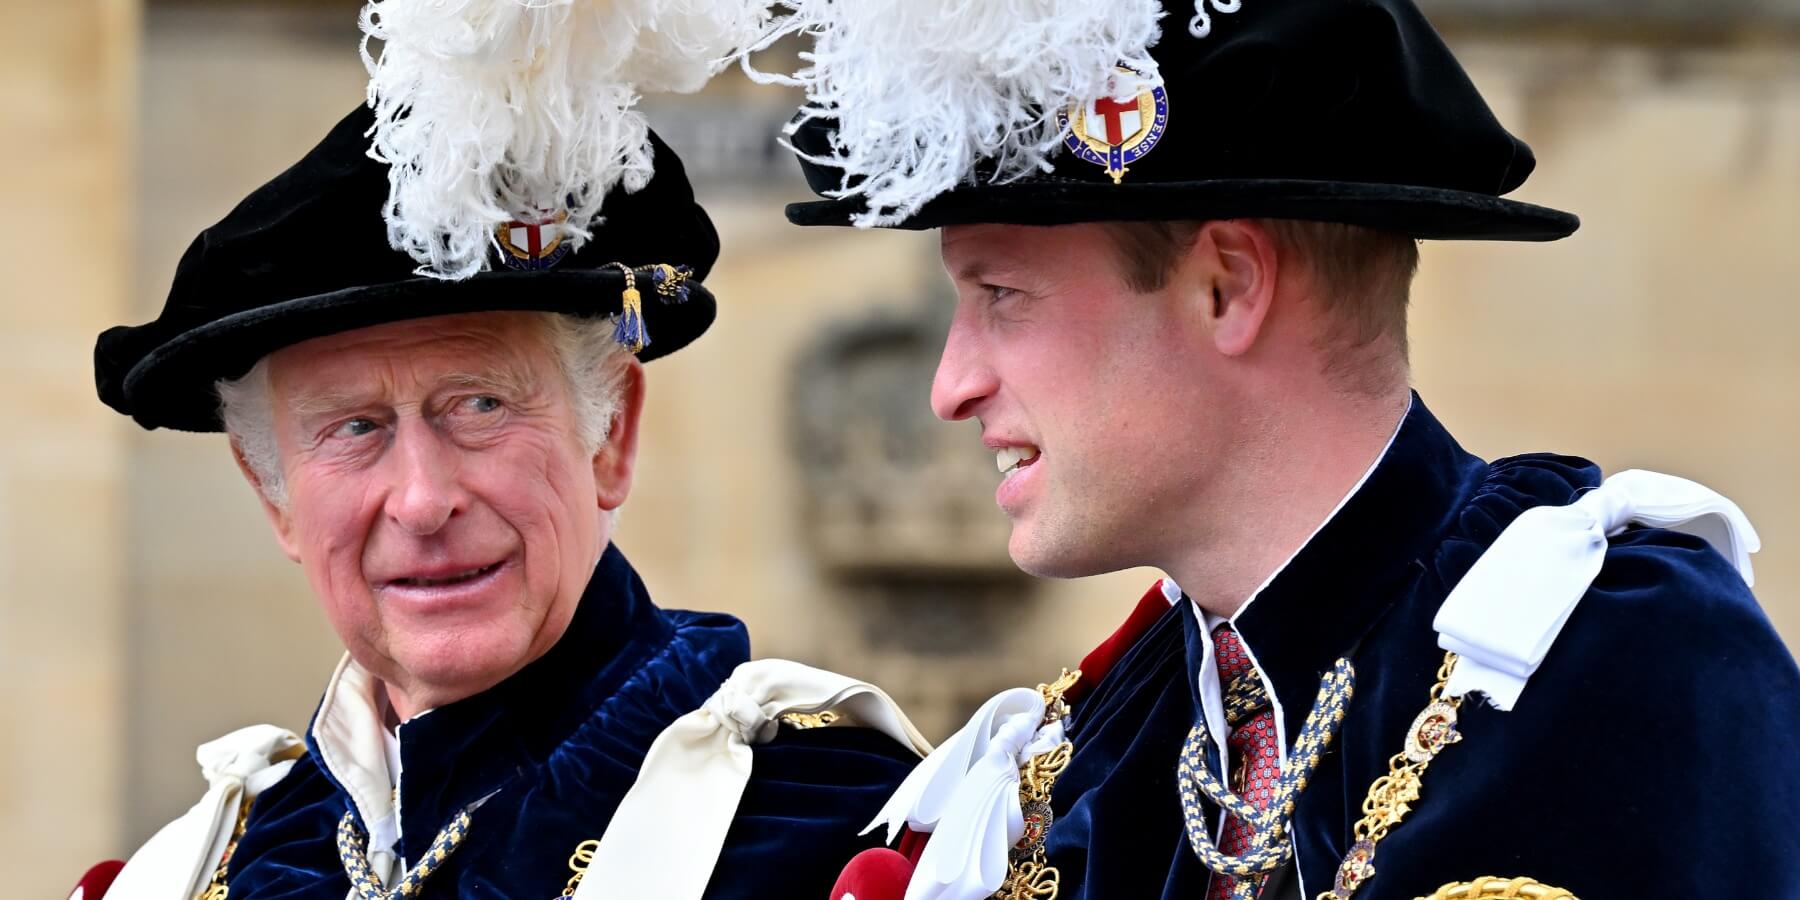 King Charles and Prince William attend The Order of The Garter service at St George's Chapel, Windsor Castle on June 13, 2022 in Windsor, England.